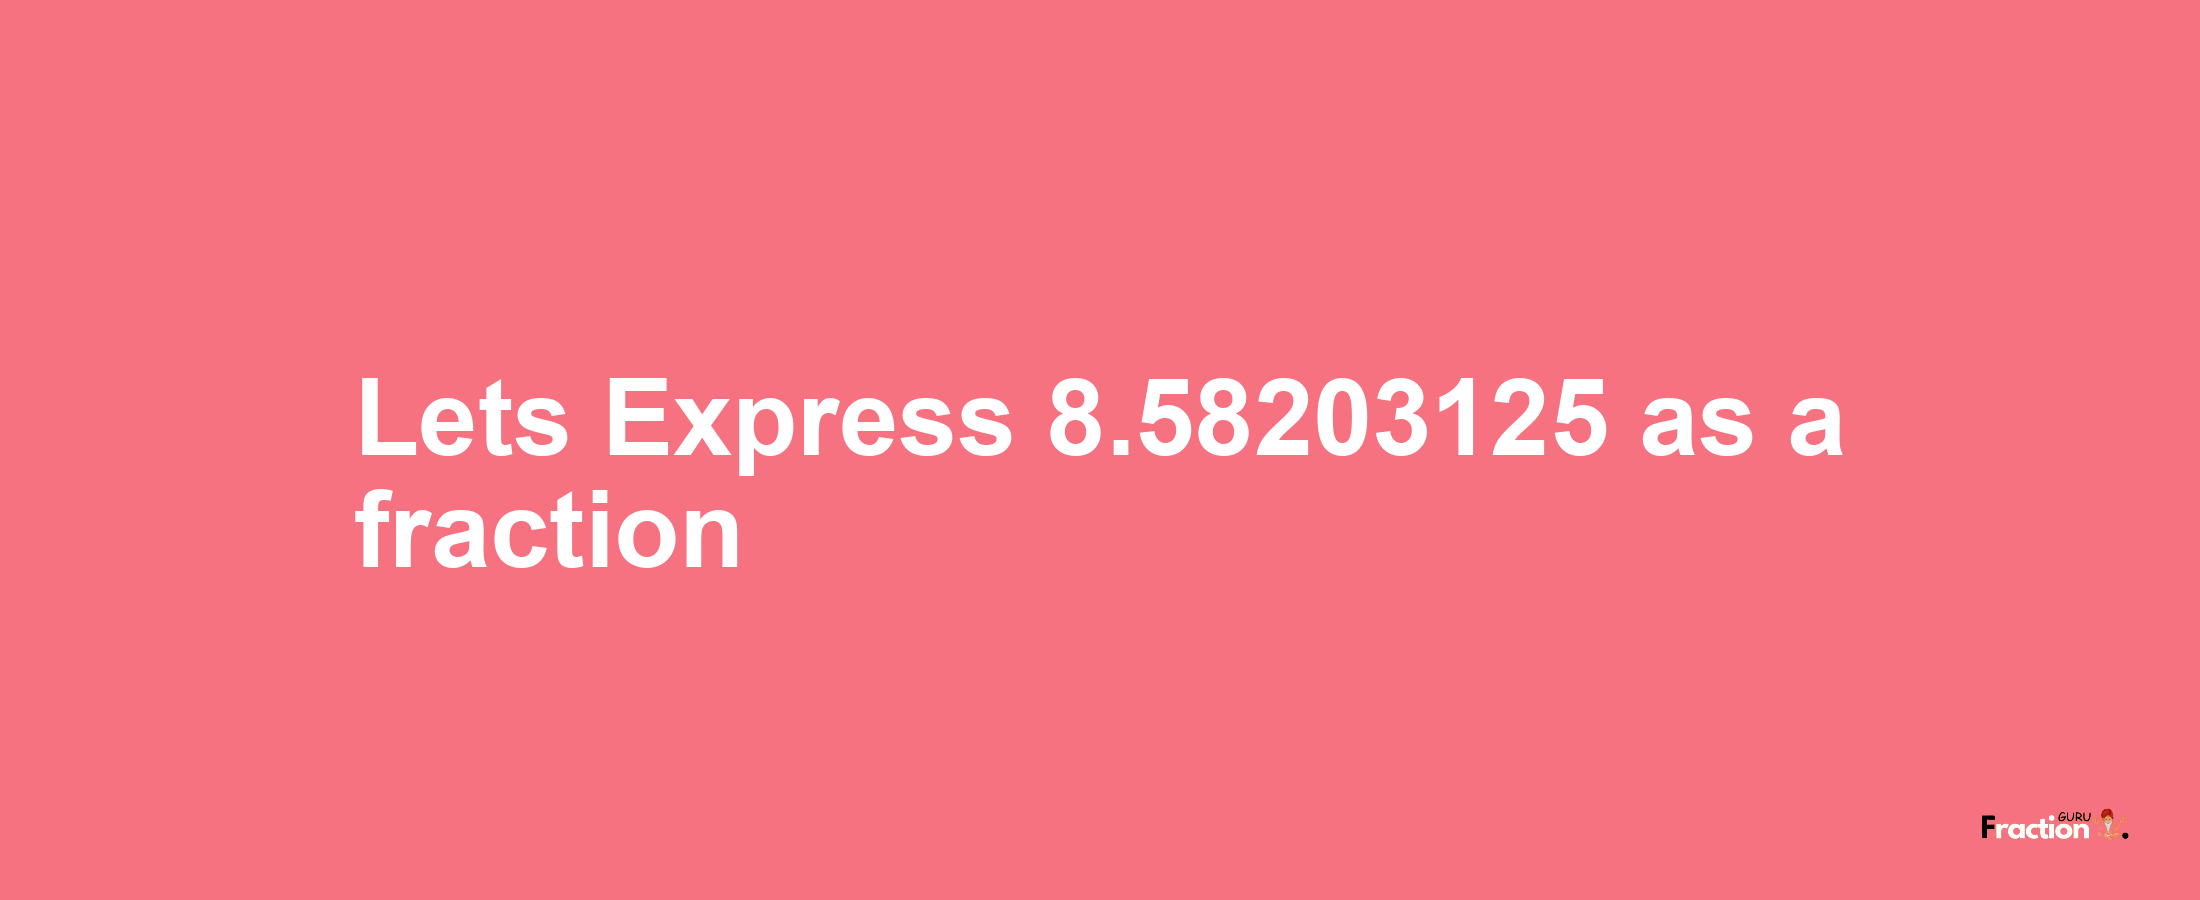 Lets Express 8.58203125 as afraction